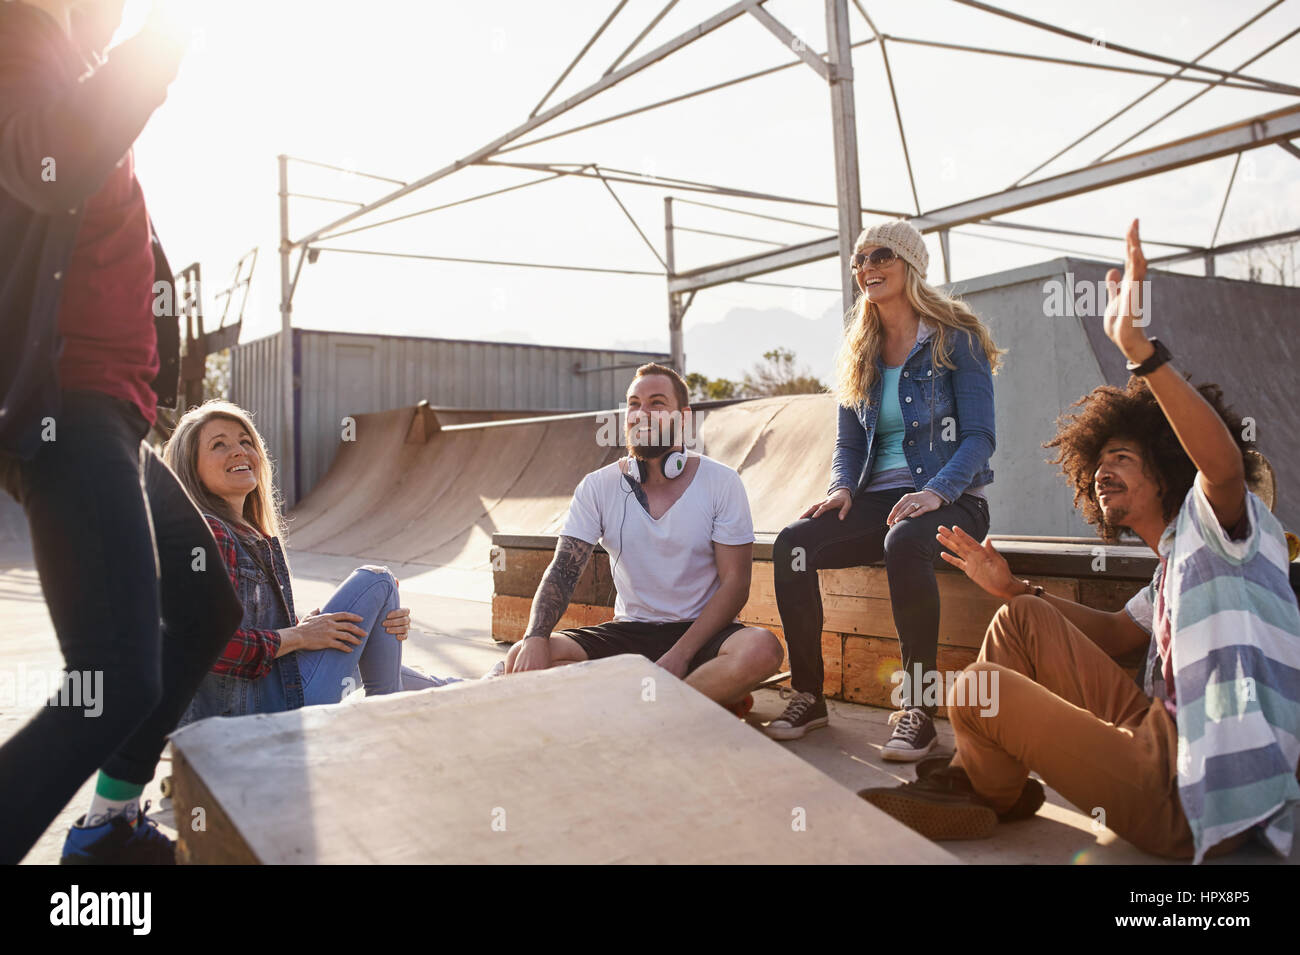 Friends hanging out and dancing at sunny skate park Stock Photo